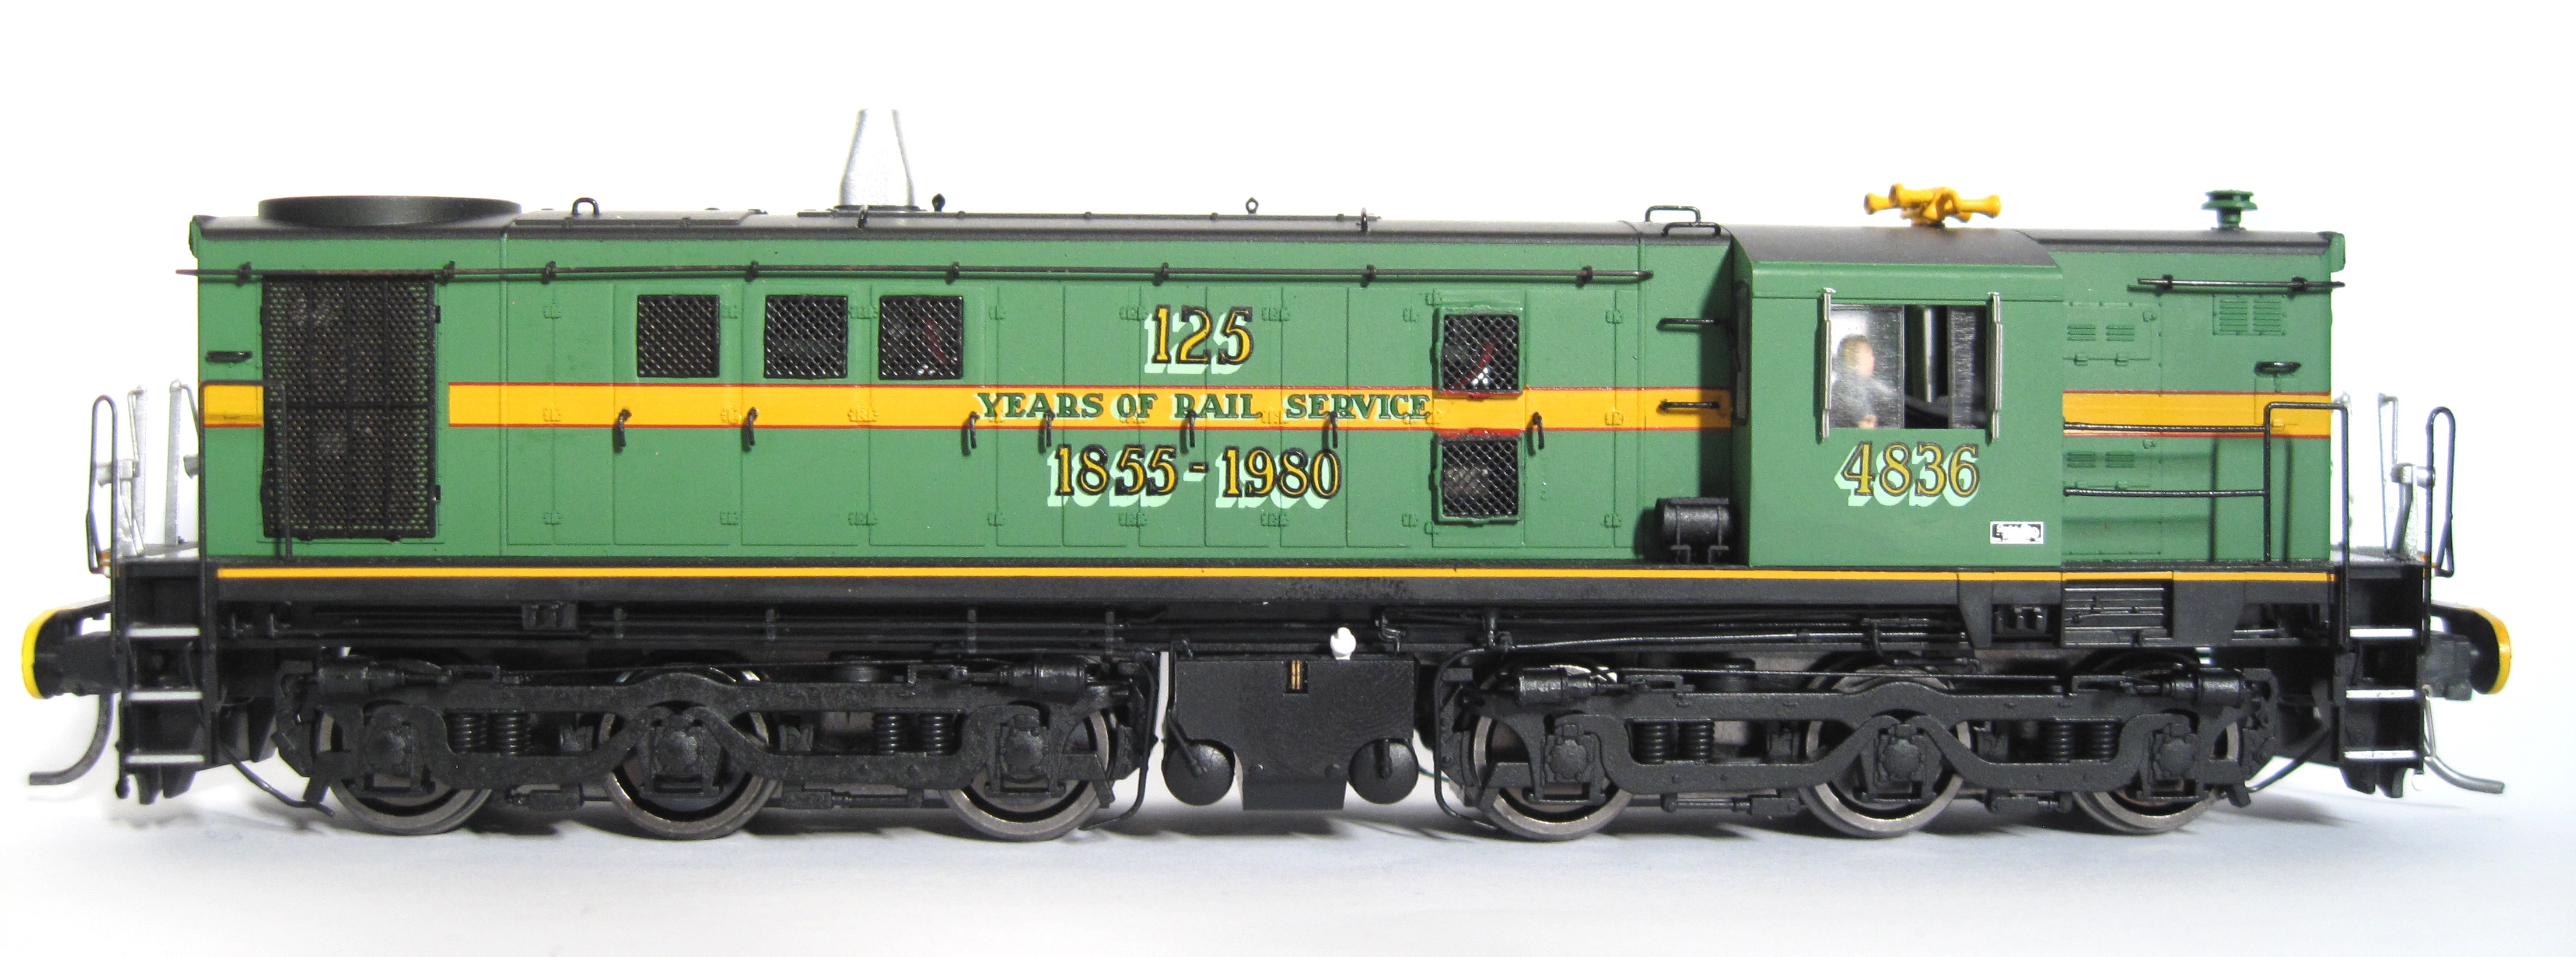 END OF THE FINANCIAL YEAR SALE, 48 CLASS (4836 125 YEARS), PRICE REDUCED TO $265